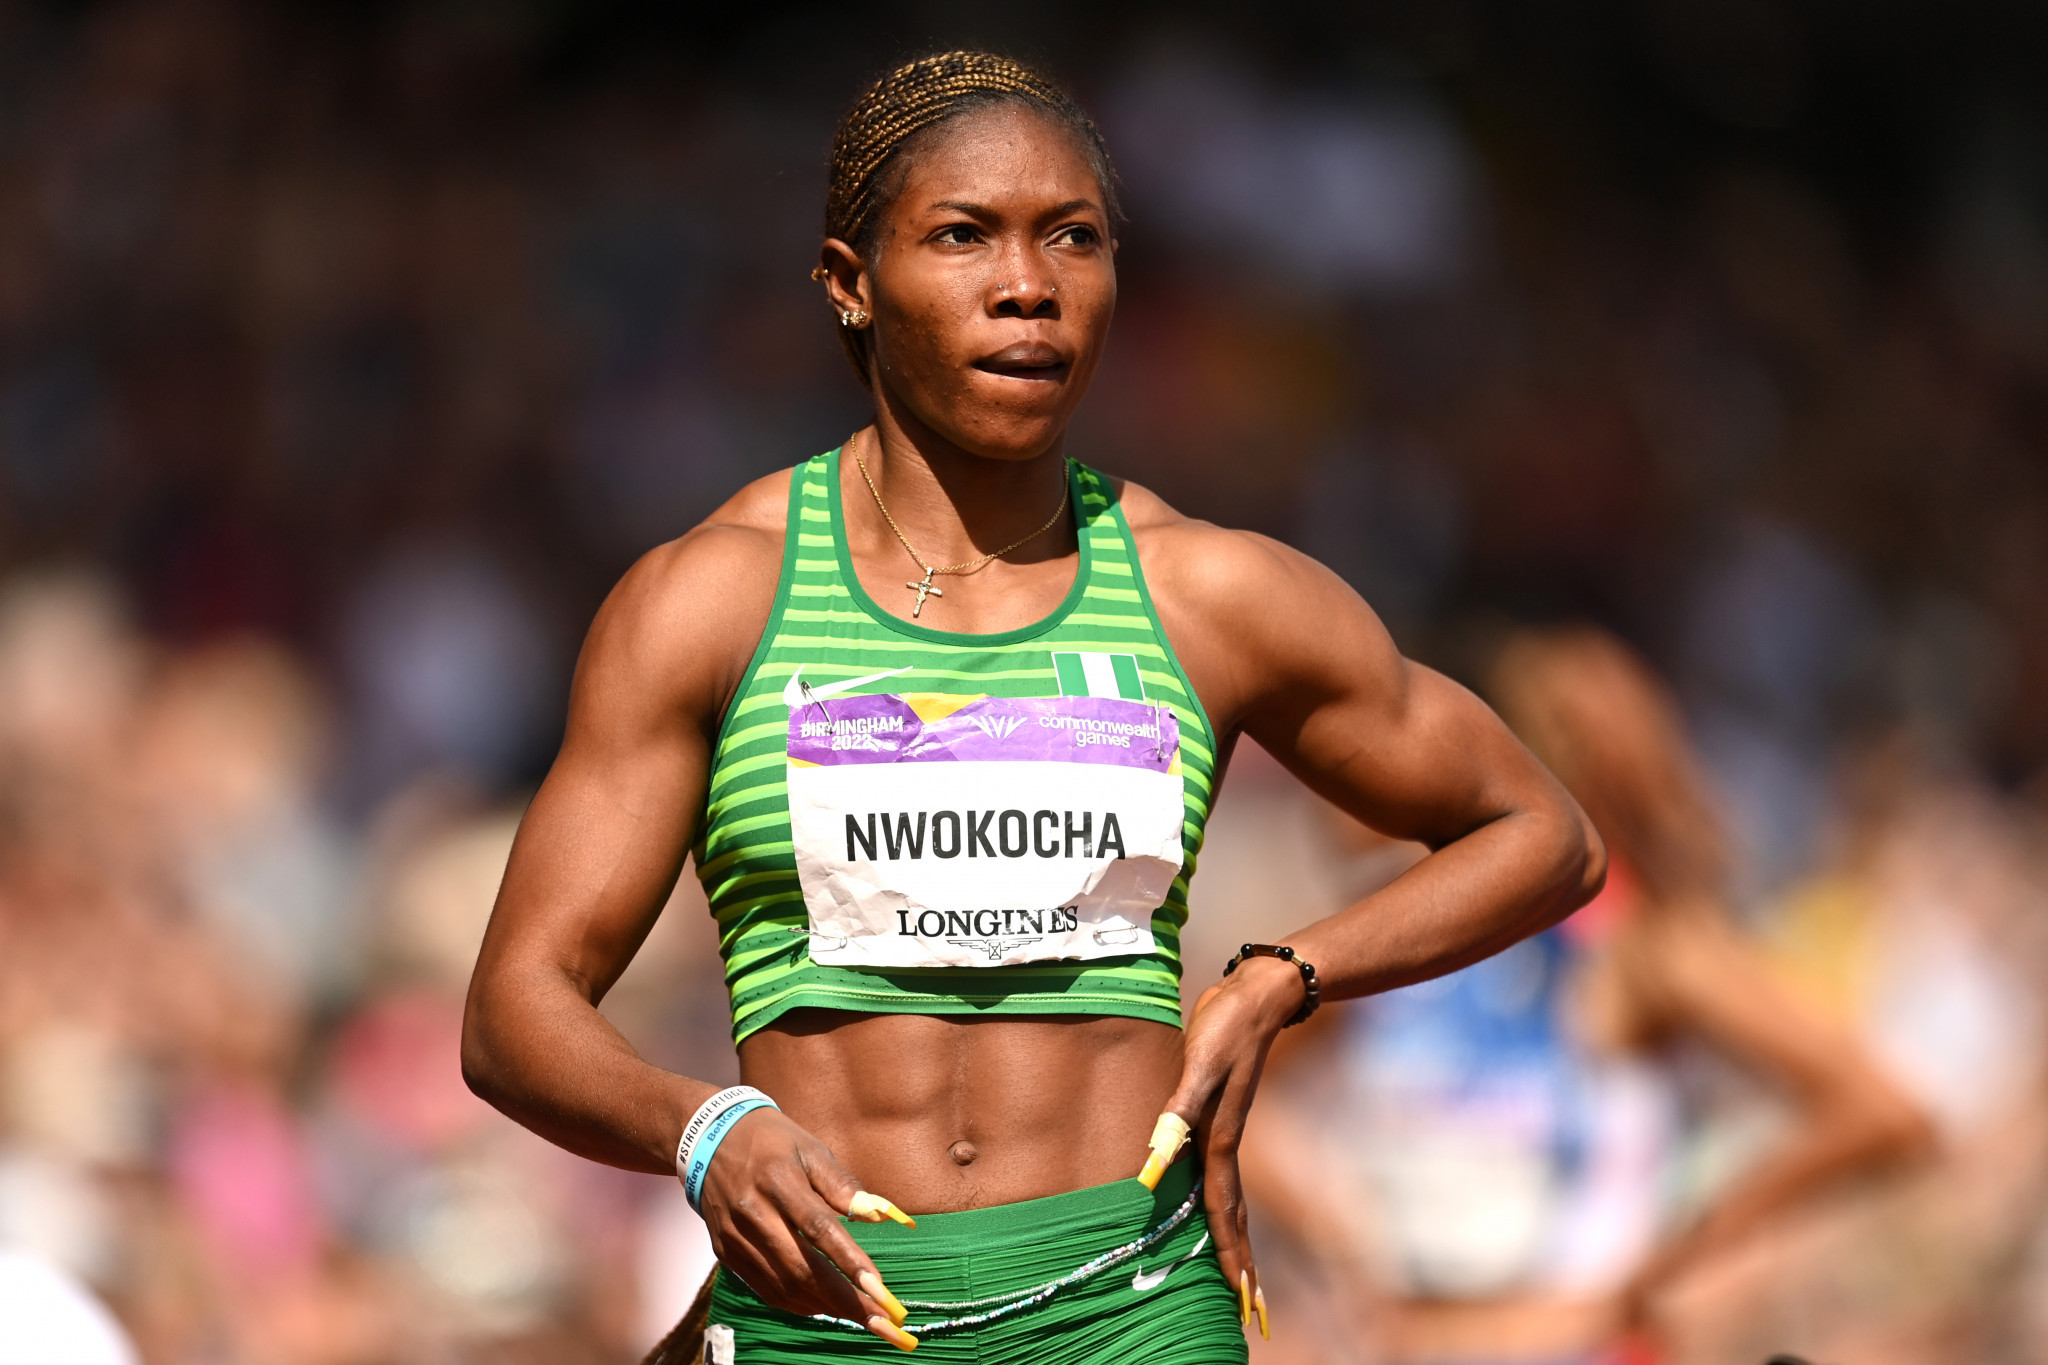 Nigerian sprinter Nzubechi Grace Nwokocha has been banned by the Athletics Integrity Unit for three years after being found guilty of a doping violation during Birmingham 2022 ©Getty Images